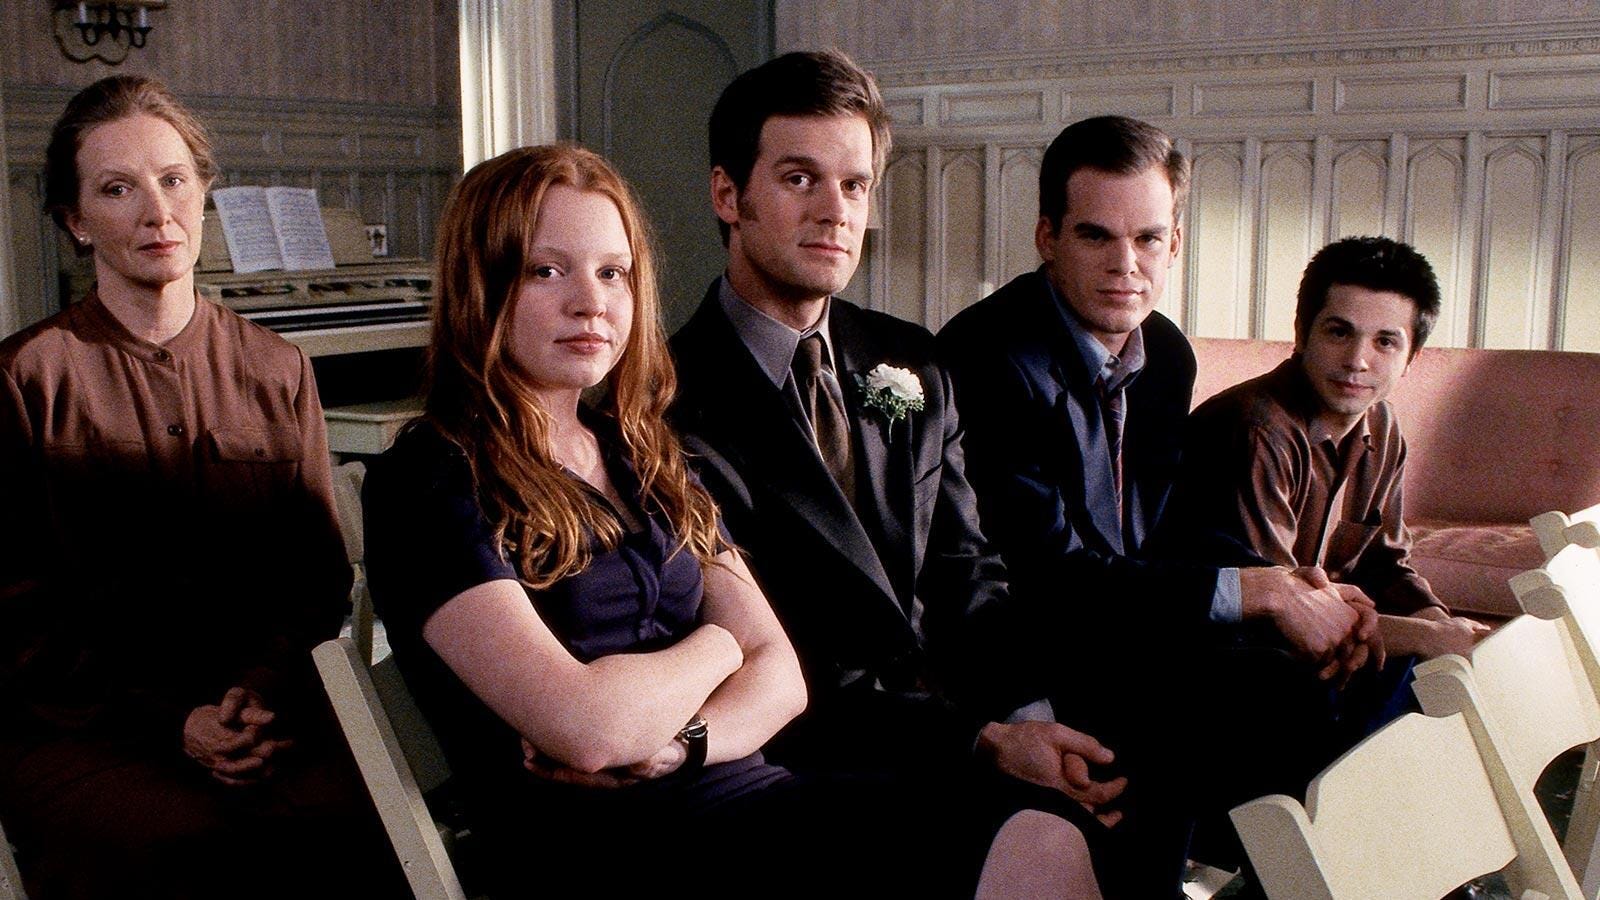 Frances Conroy, Lauren Ambrose, Peter Krause, Michael C. Hall, and Freddy Rodriguez, Six Feet Under